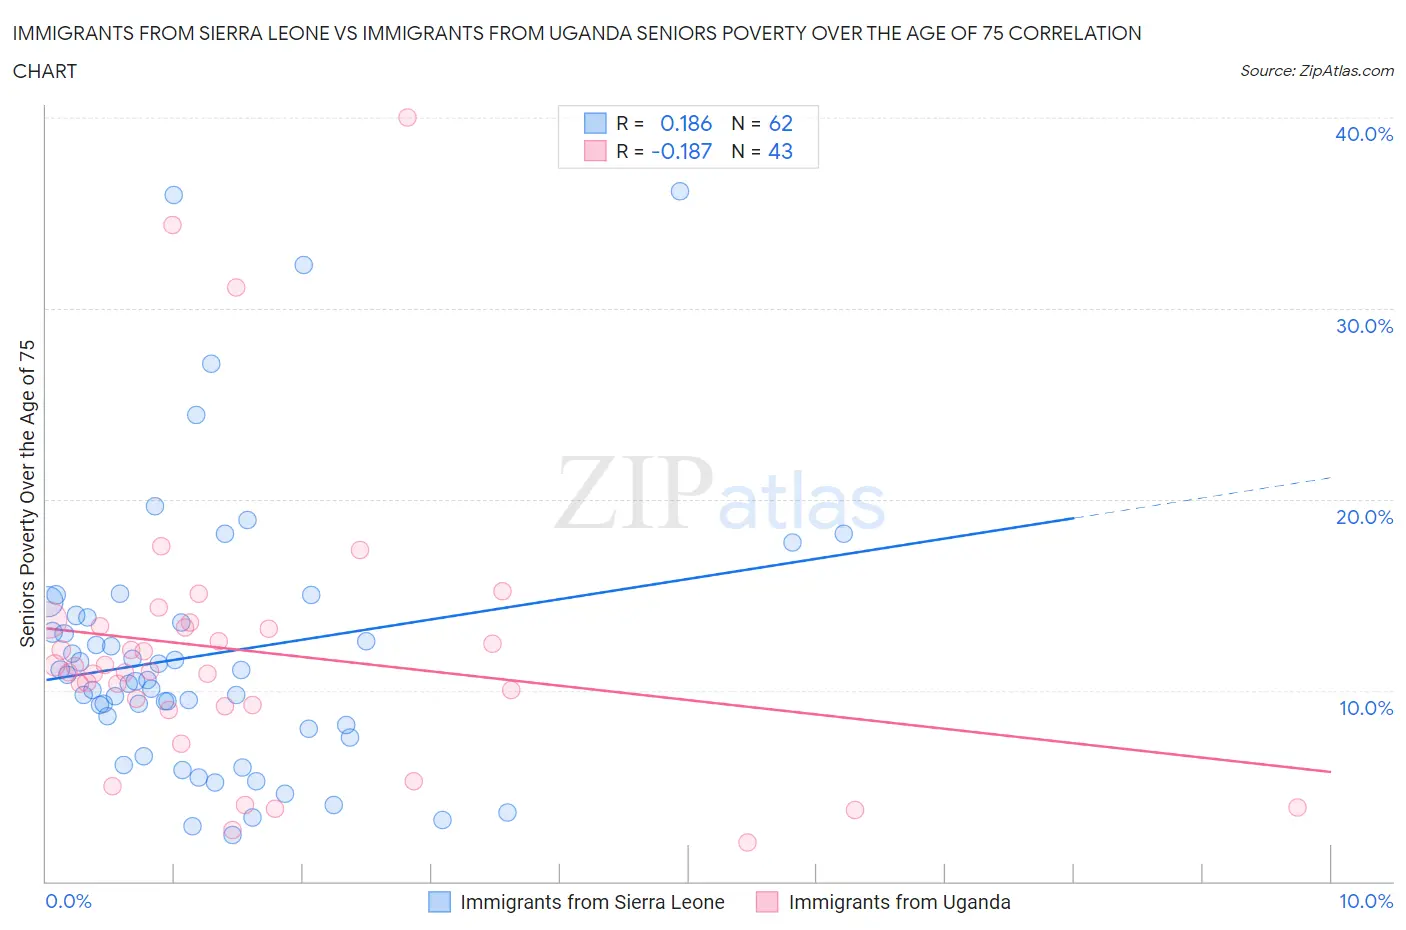 Immigrants from Sierra Leone vs Immigrants from Uganda Seniors Poverty Over the Age of 75